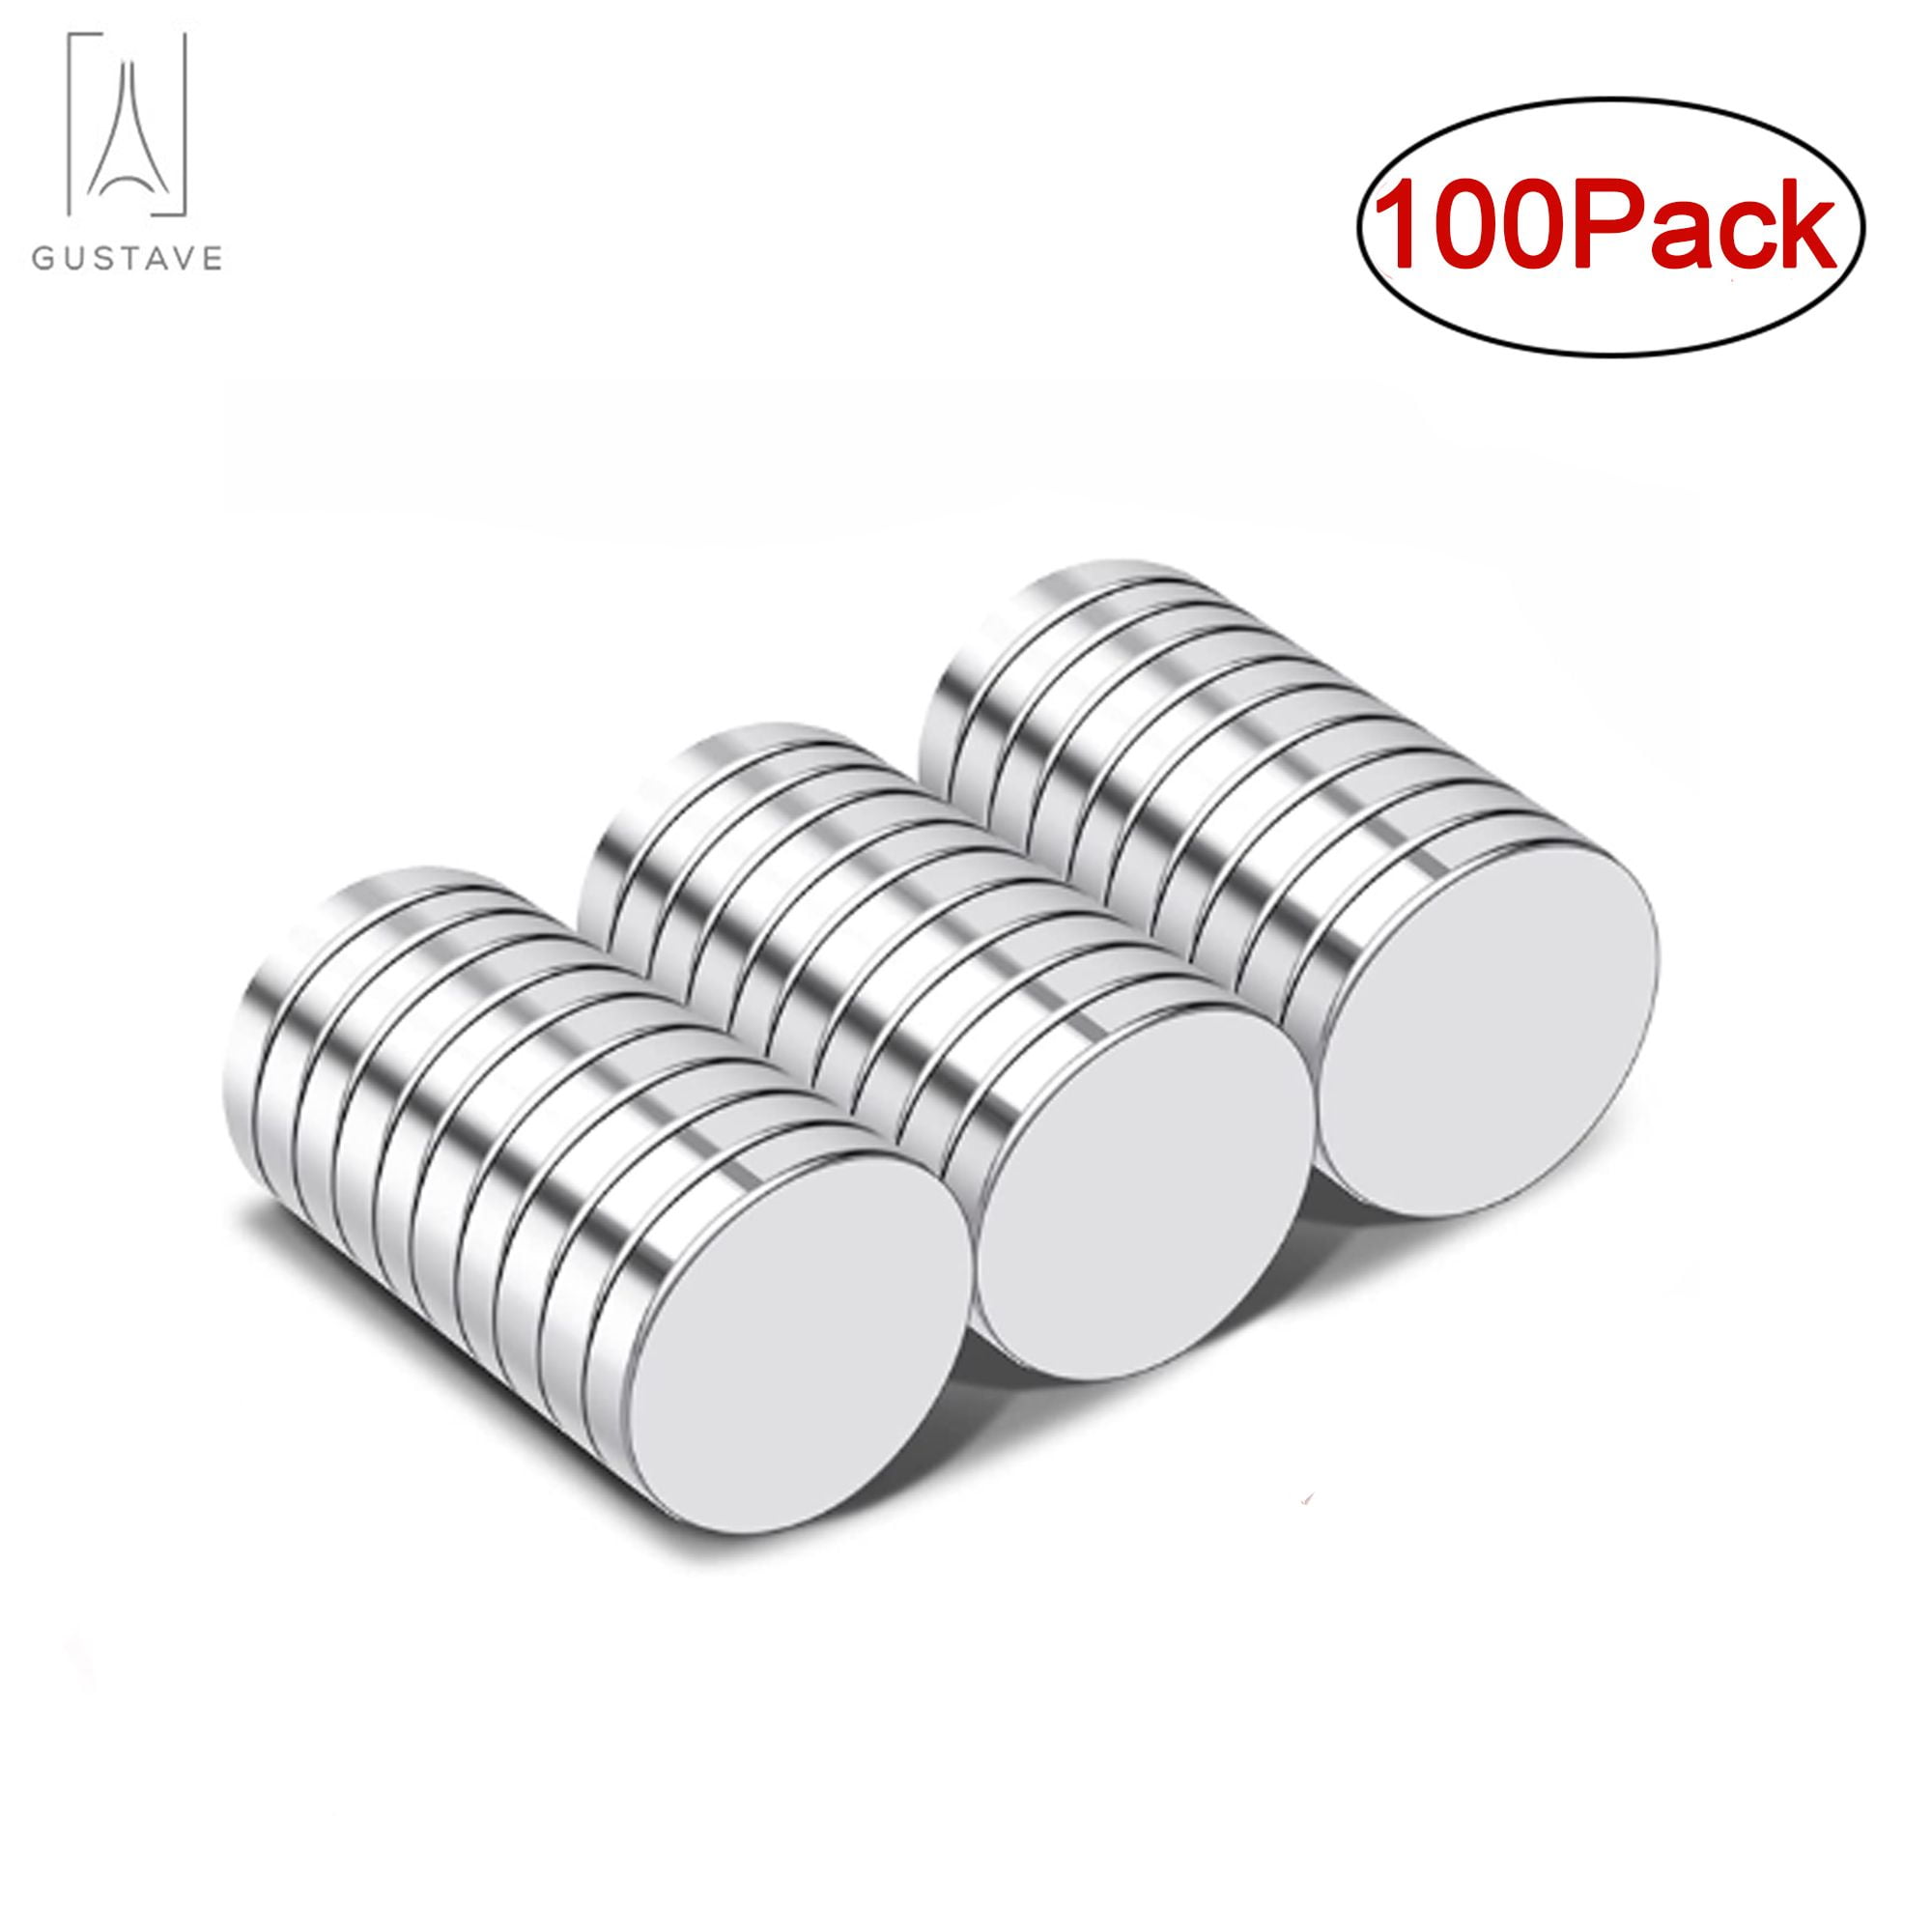 40 Pcs Super Strong Neodymium Disc Magnets, 18mm x 3mm Small Magnets for  Dry Erase Board Whiteboard Office Fridge Crafts, Mini Round Rare Earth  Magnets for DIY Building Scientific Models 